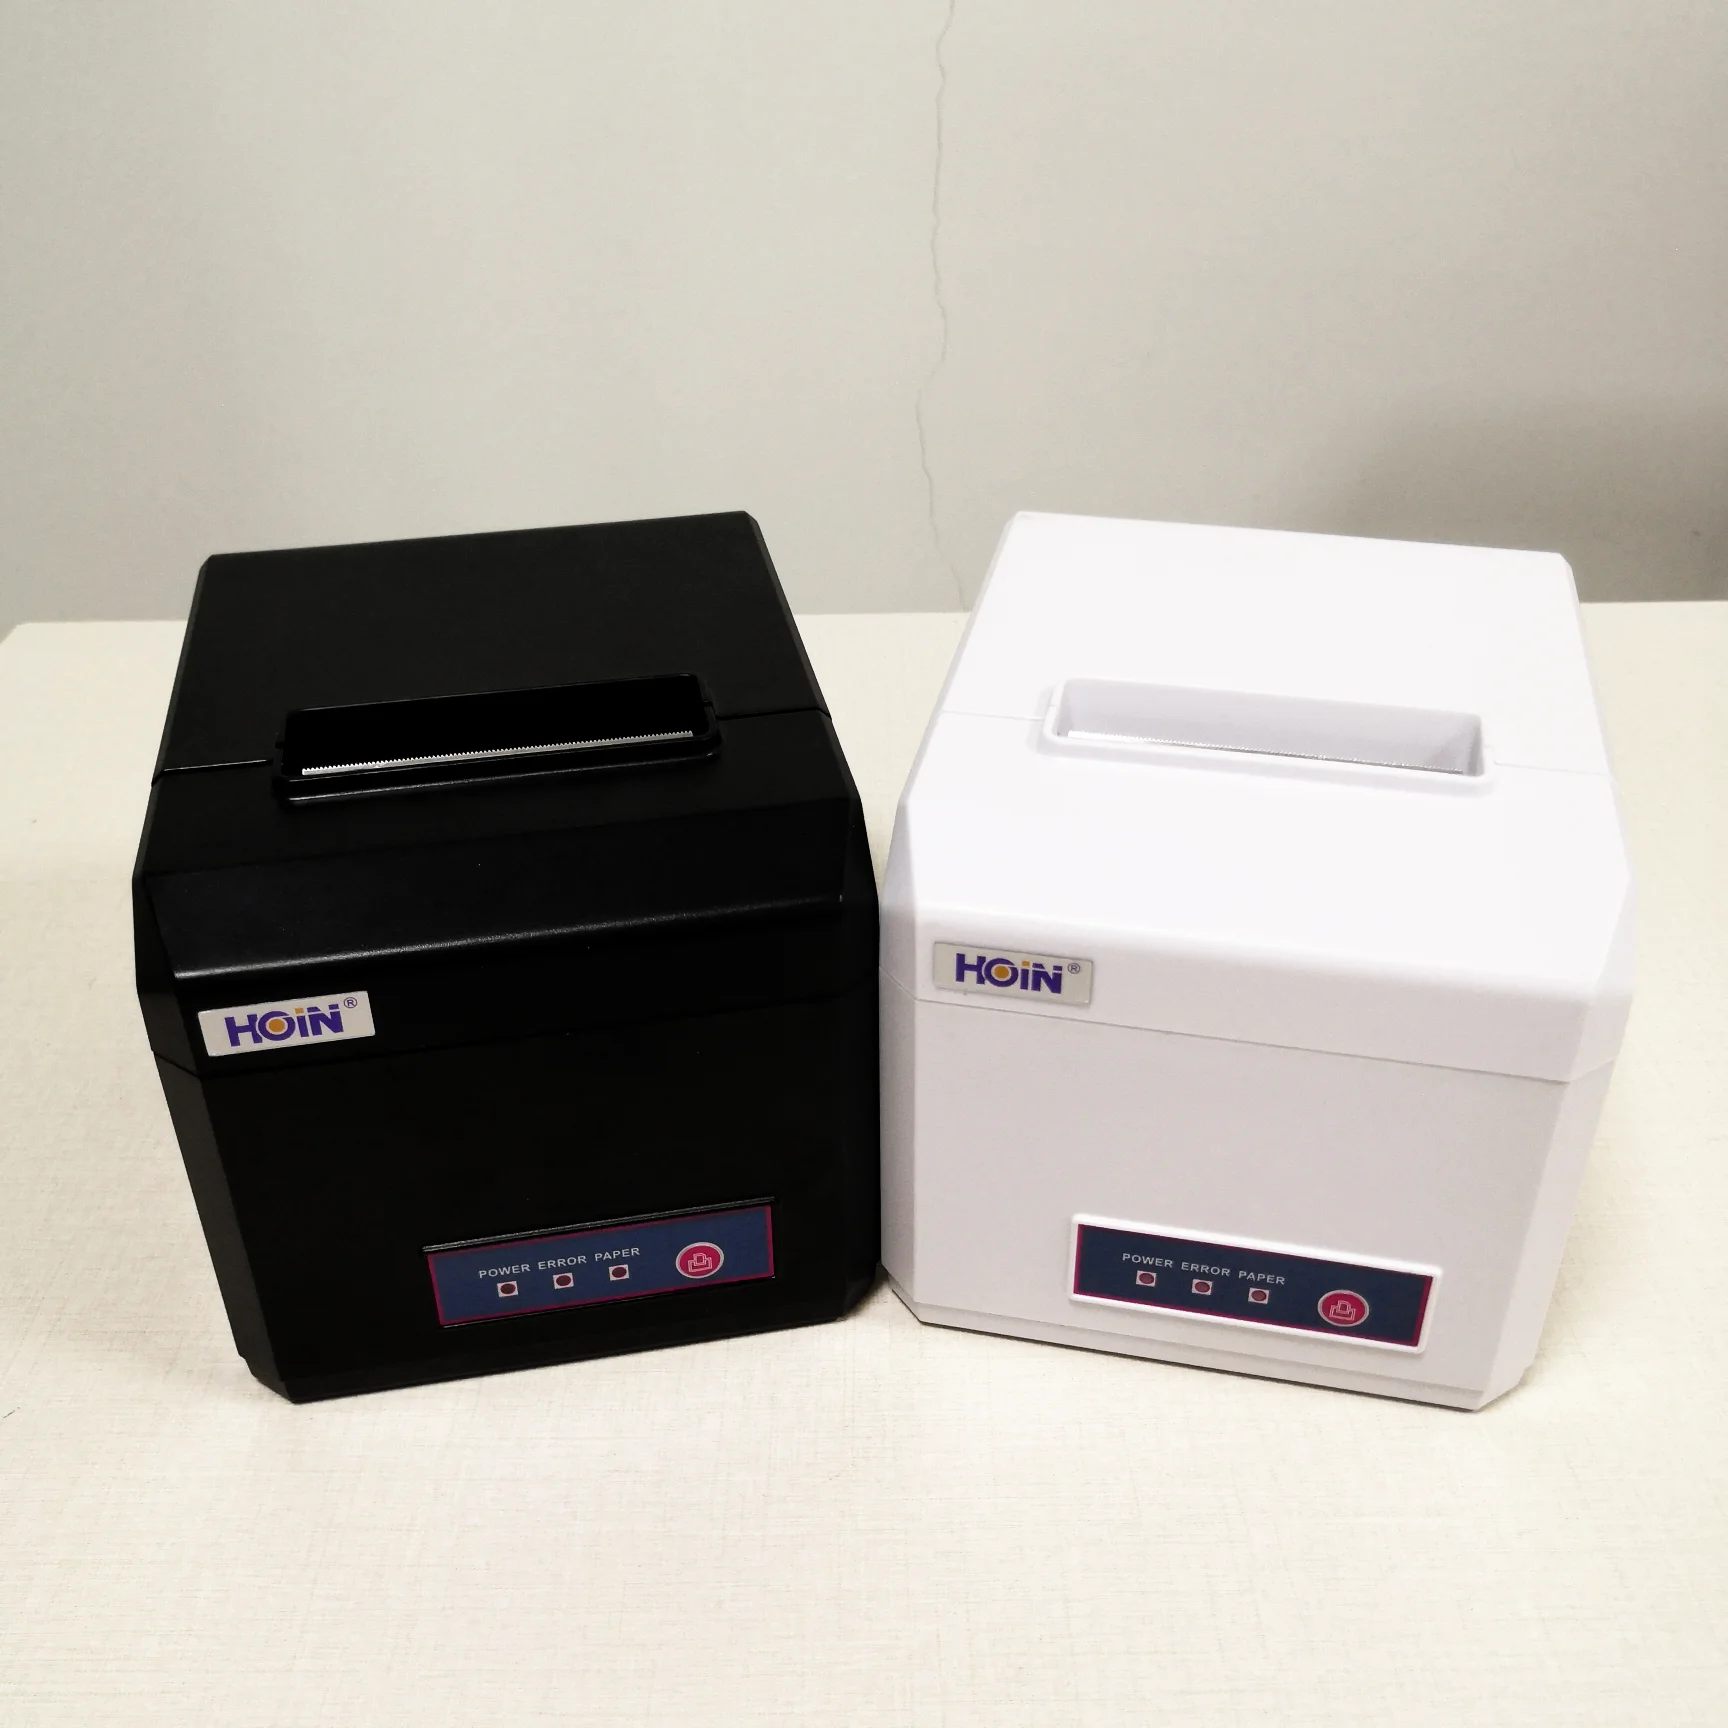 

HOIN 80mm POS Receipt Printer with Auto Cutter for Retail cheap Thermal Printer min POS System Printer